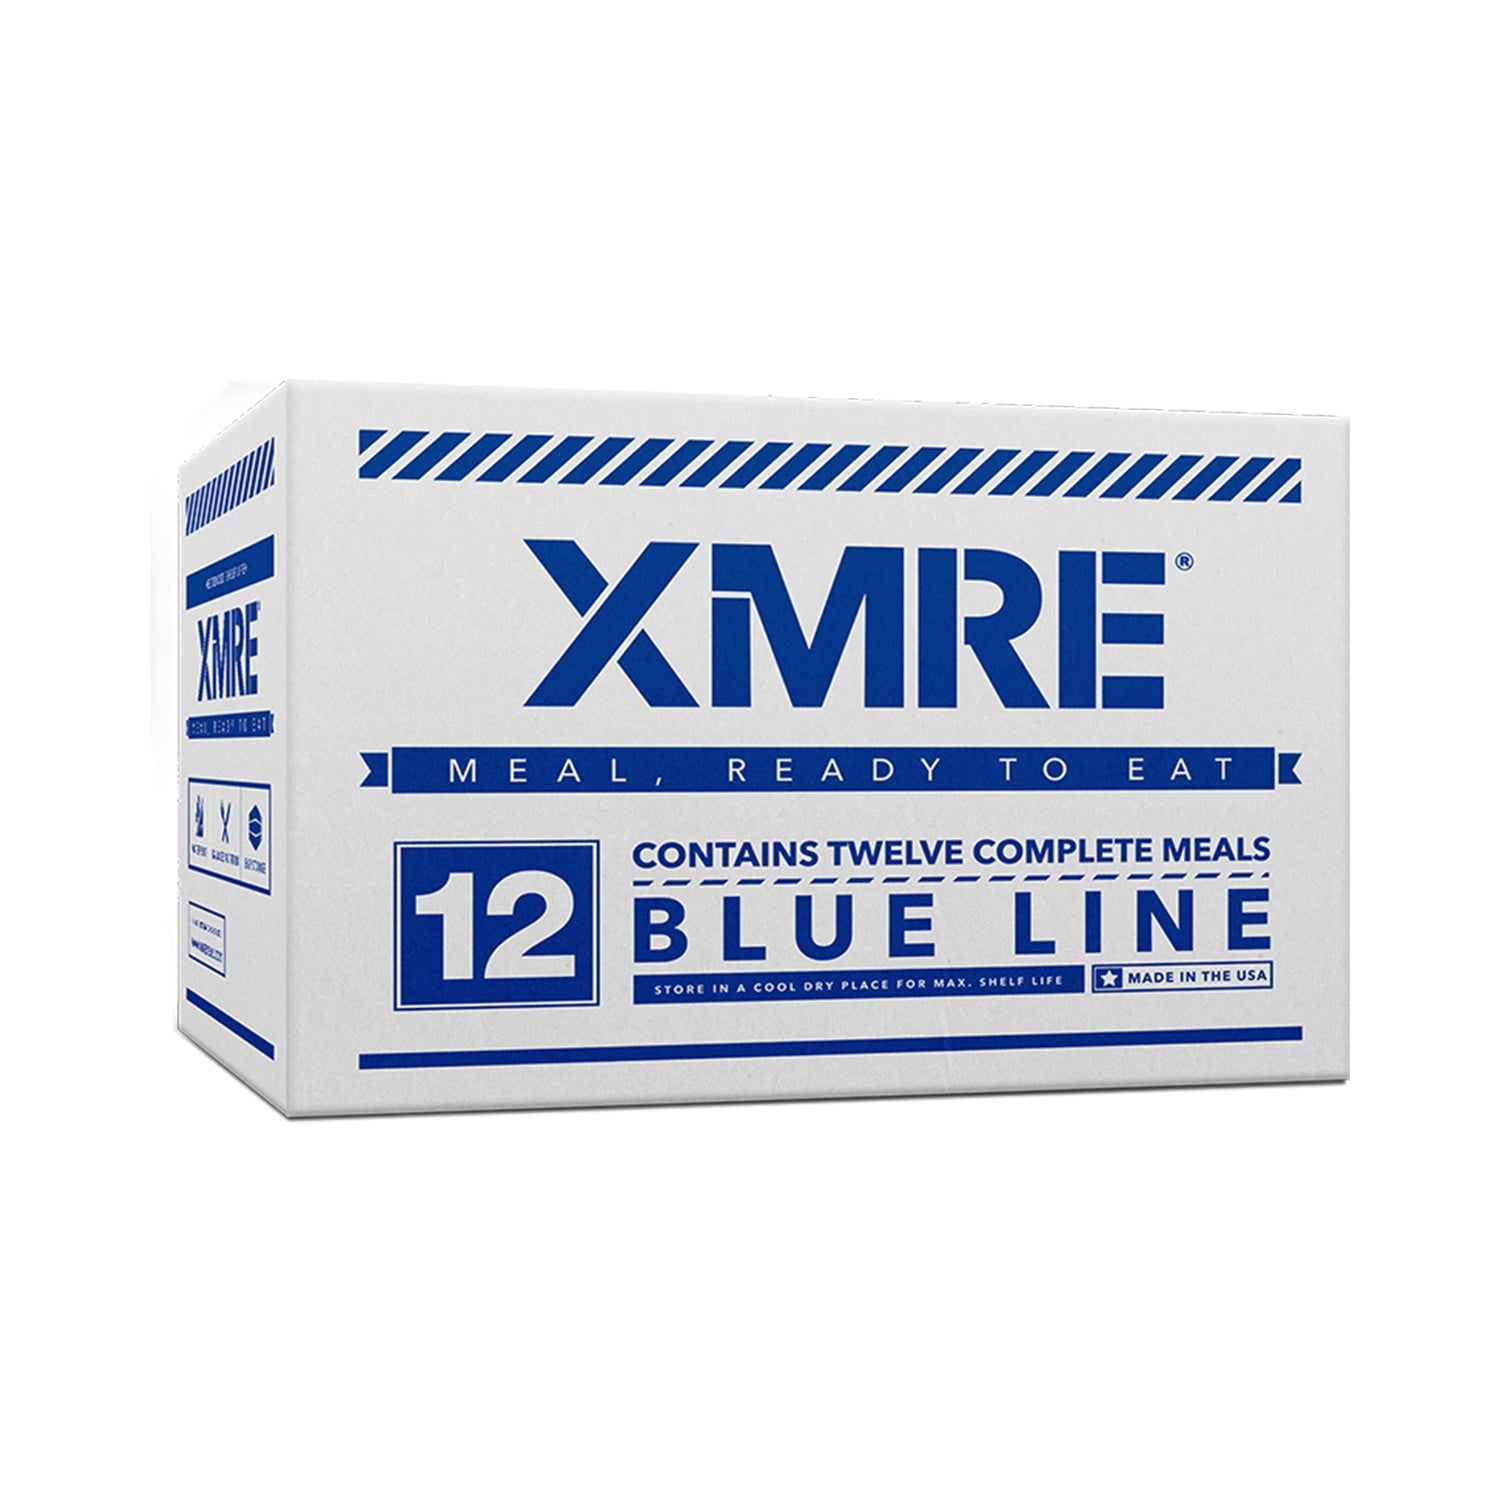 XMRE Blue Line Meals - 12 Case with Heaters (Meal Ready to Eat)